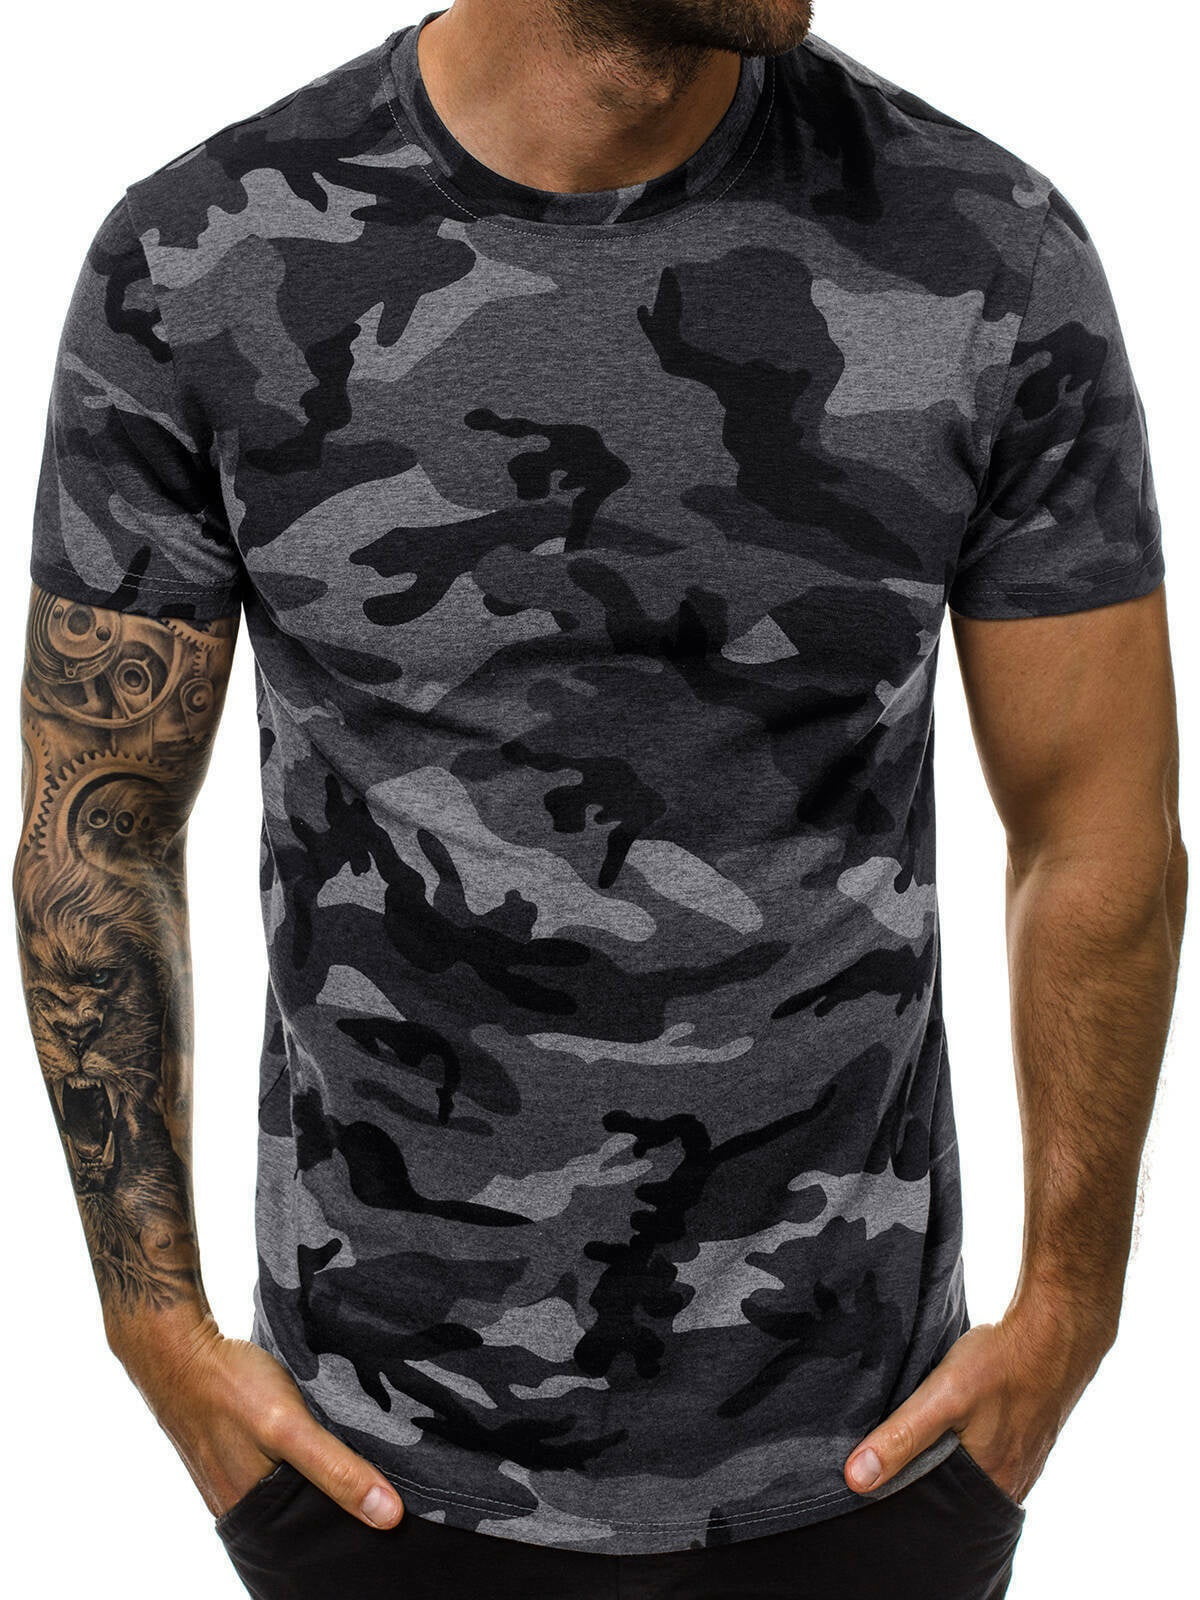 Men's Short Sleeve Forest Camo Print T Shirt Camouflage Forest  Army Top S-5XL 